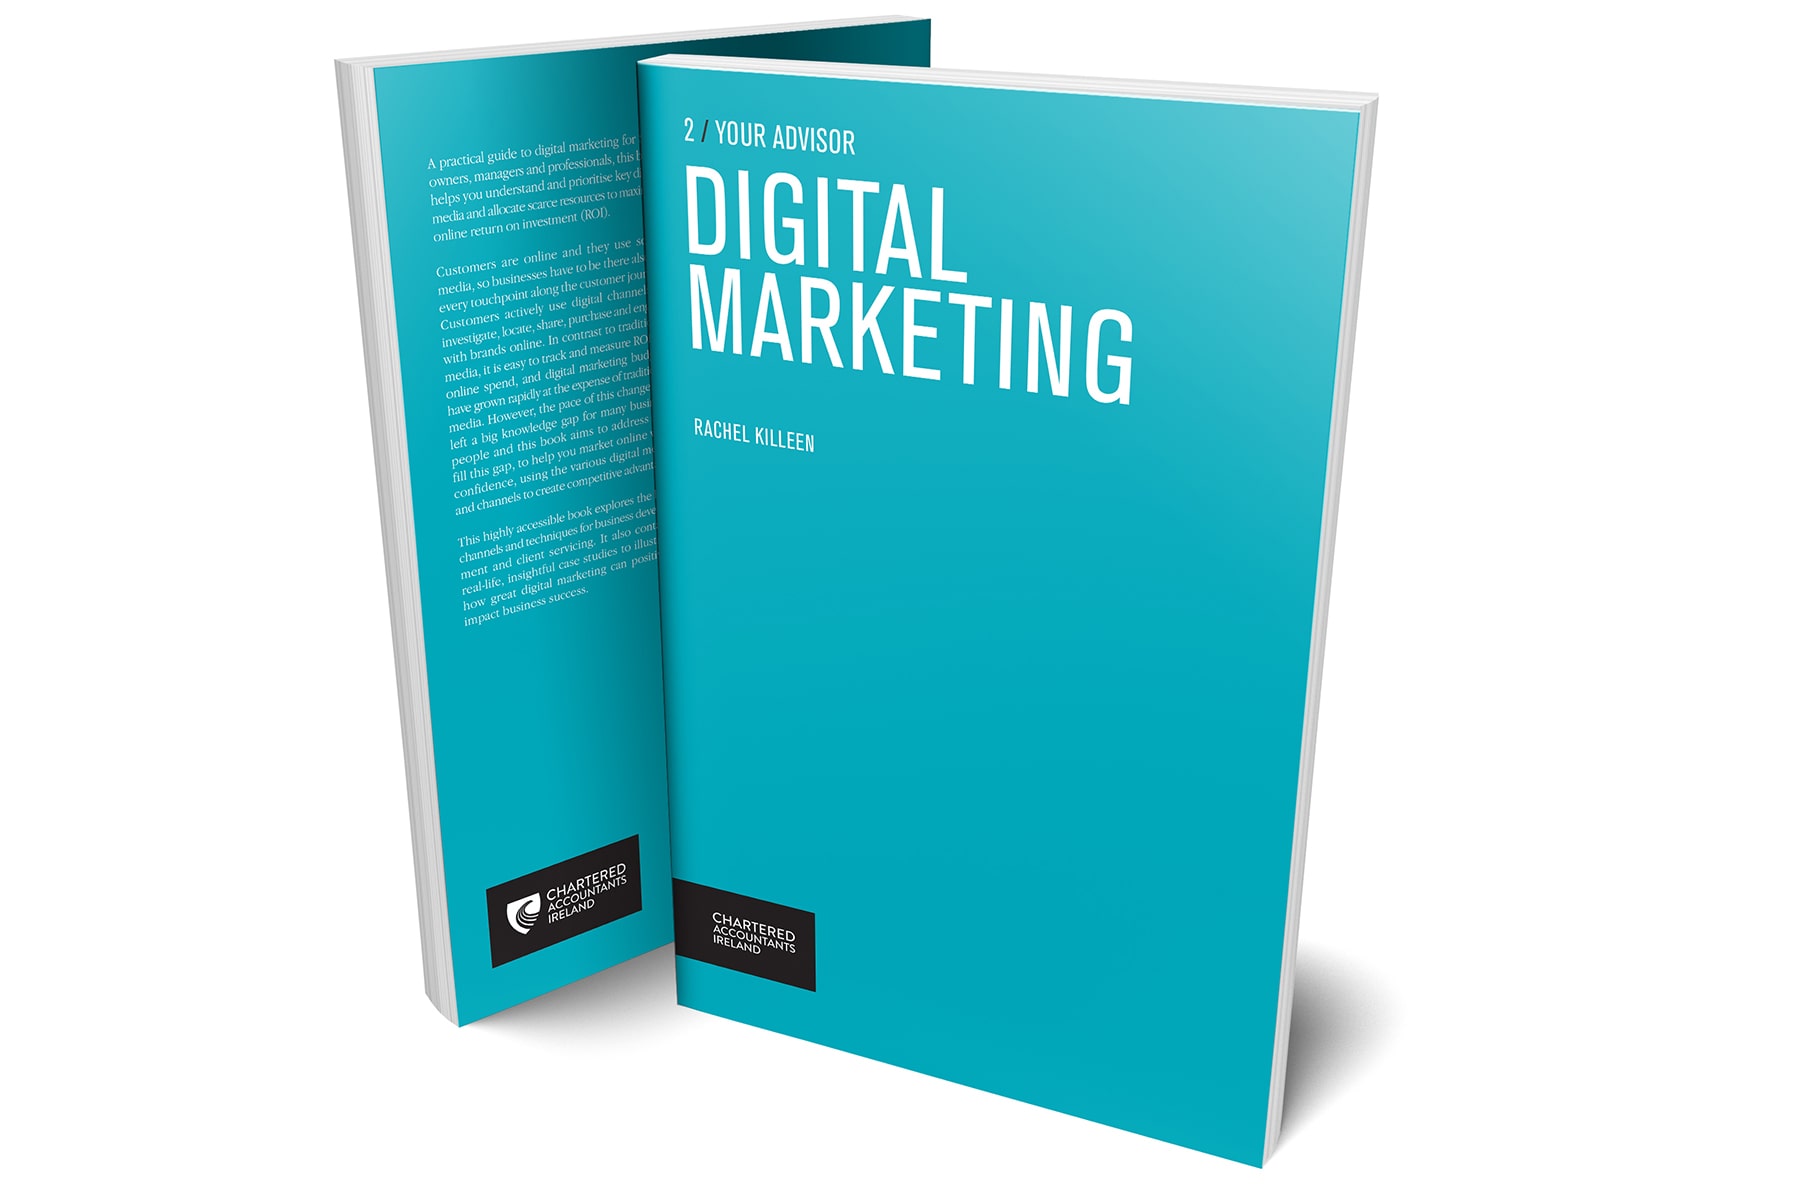 3D book cover of Digital Marketing by Rachel Killeen. Light blue cover with white text.